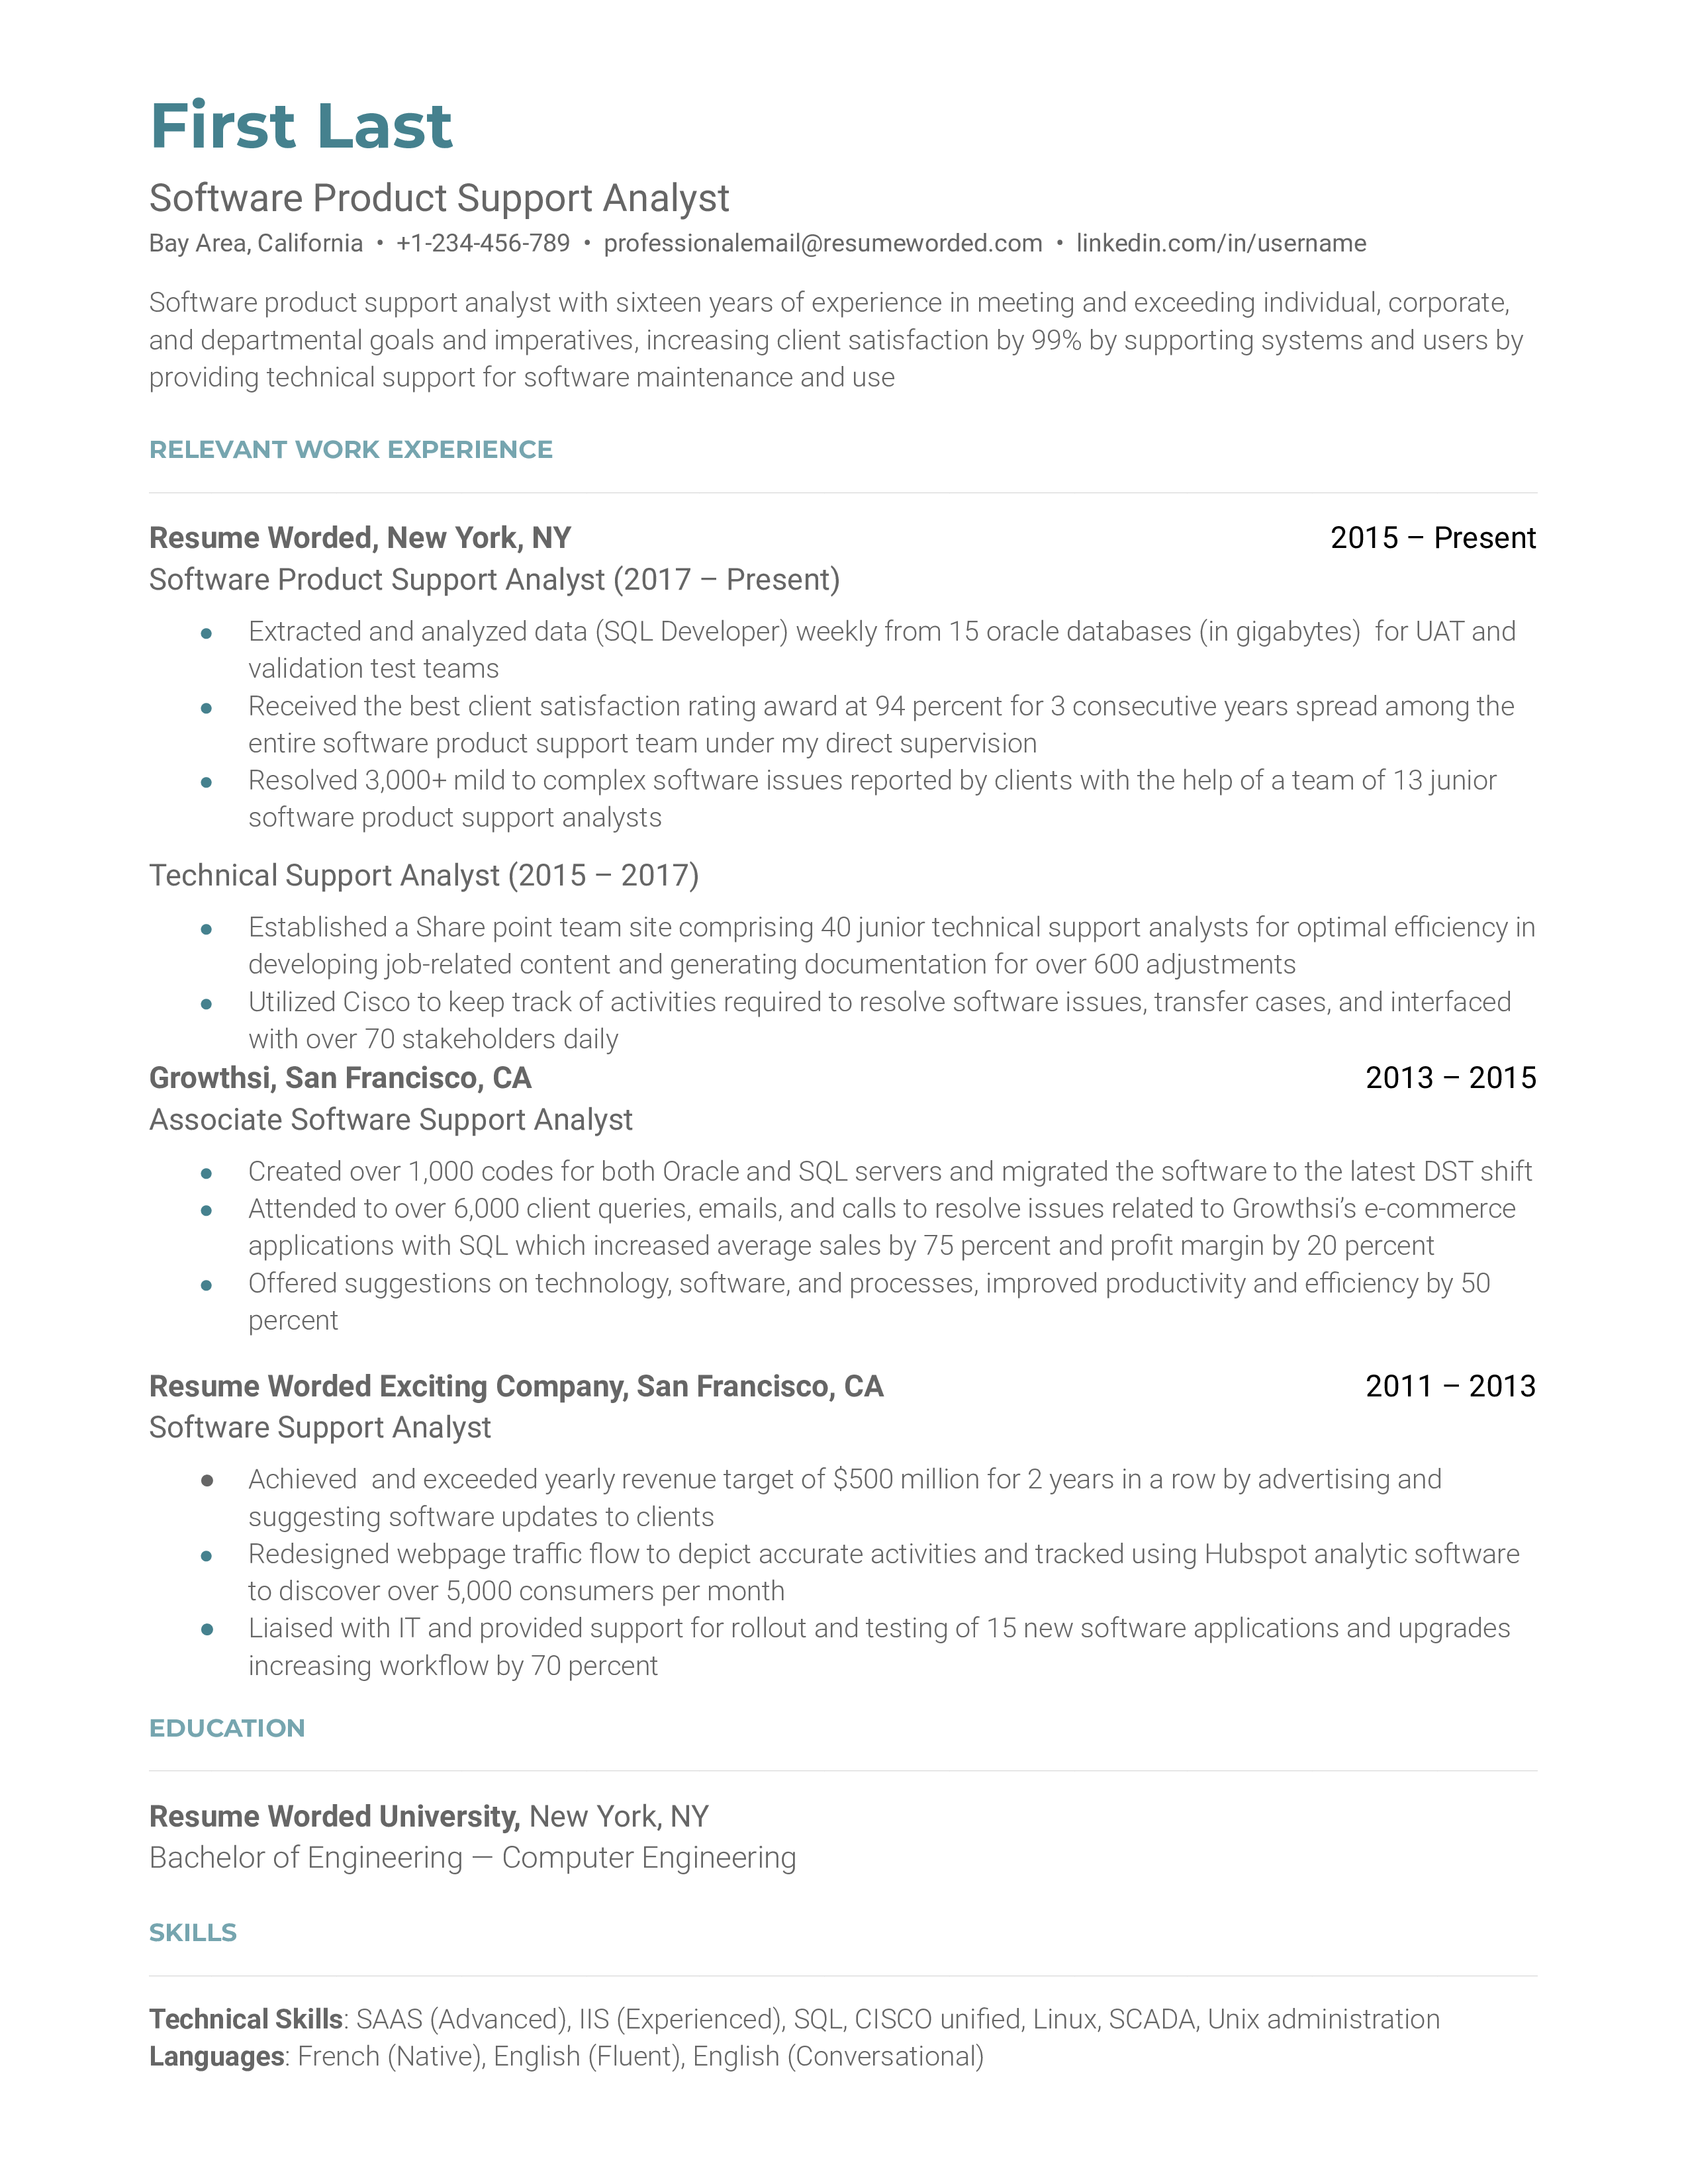 A resume example template shows how to create a good software product support analyst's resume that will help you land a job.